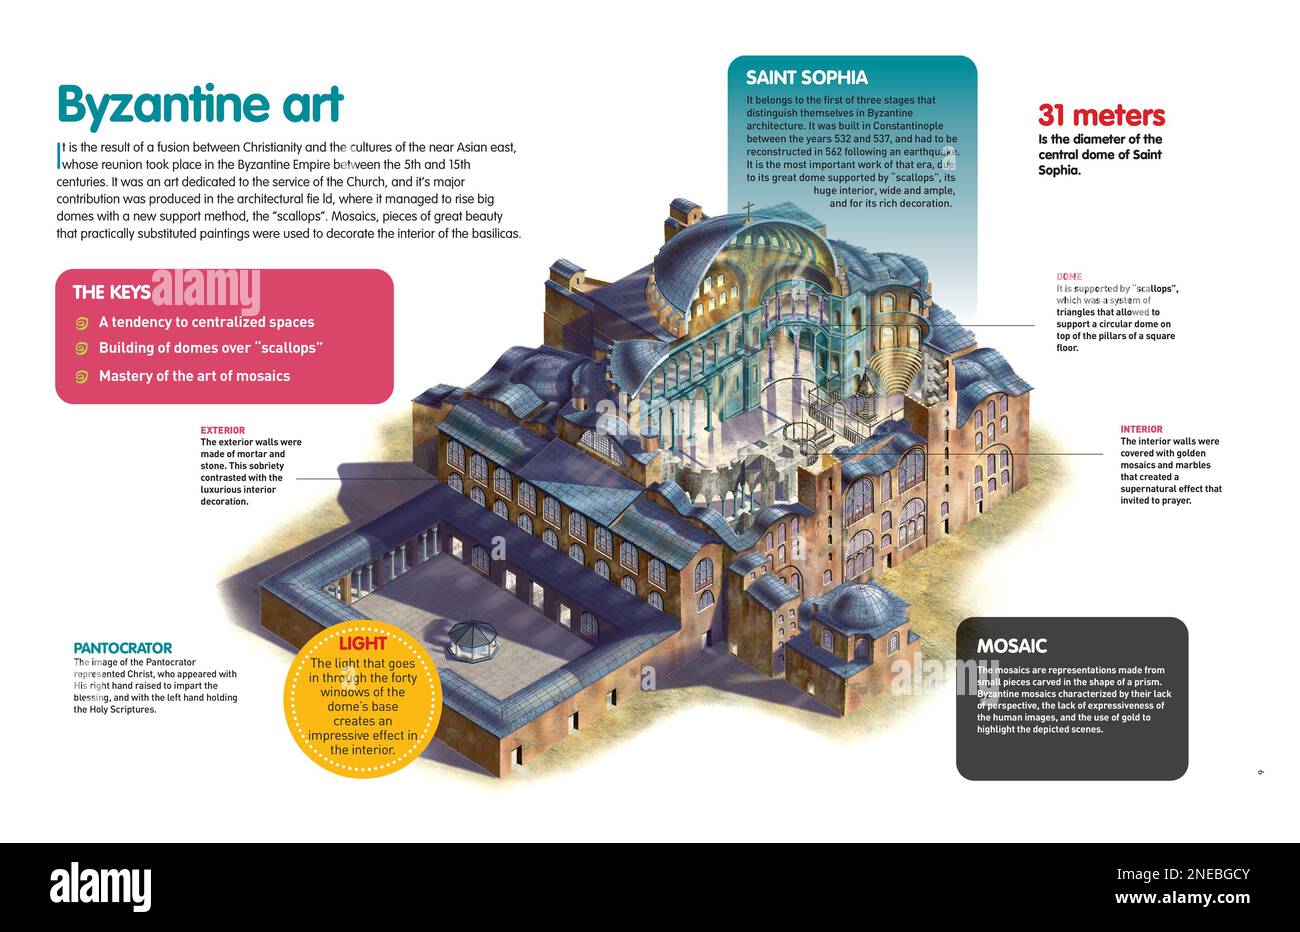 Infographic about the basilica of St. Sophia in Constantinople (today Istanbul), paradigm of Byzantine architecture, and the main characteristics of Byzantine art. [QuarkXPress (.qxp); Adobe InDesign (.indd); 4960x3188]. Stock Photo